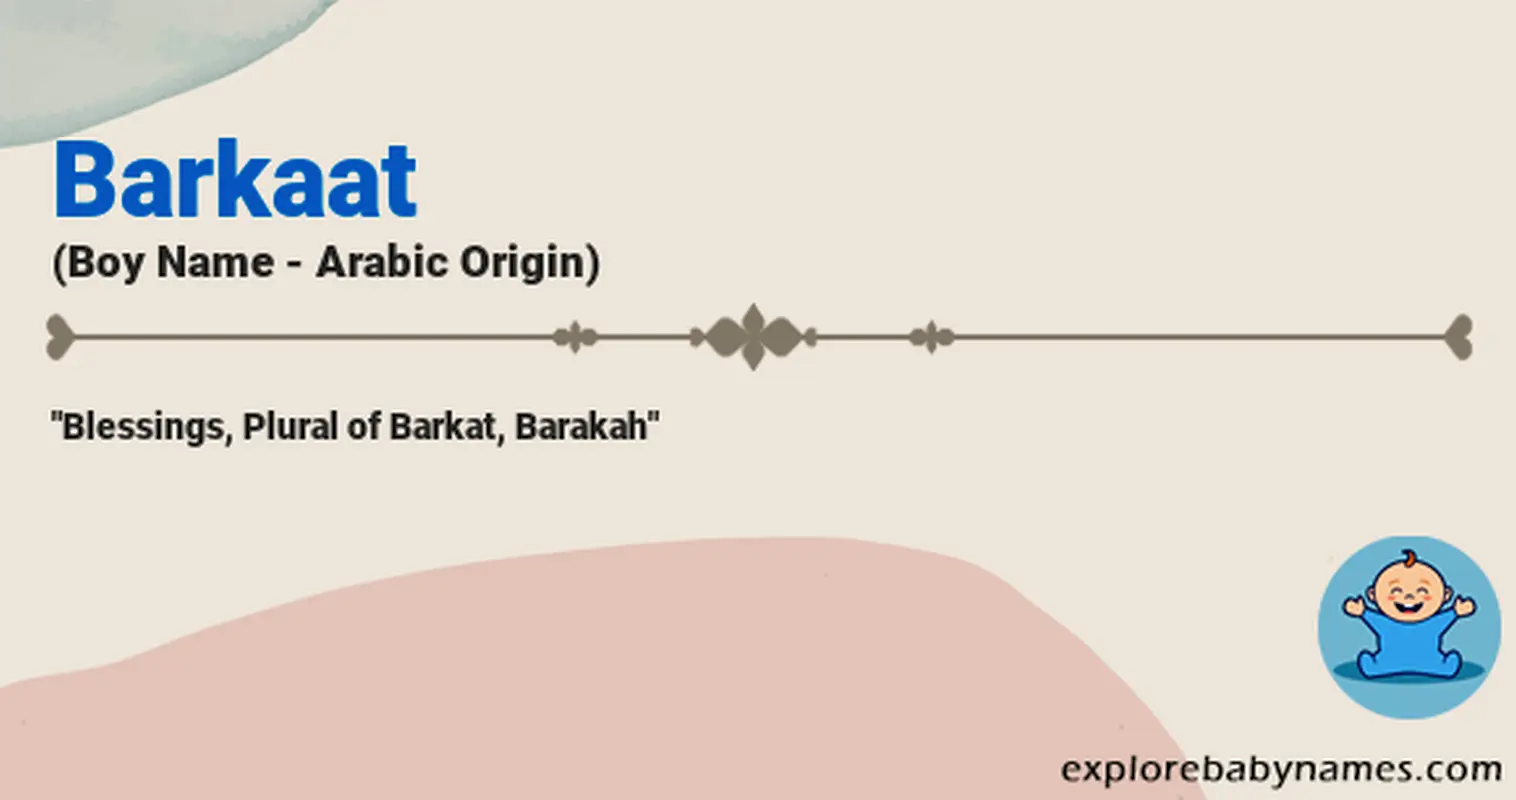 Meaning of Barkaat